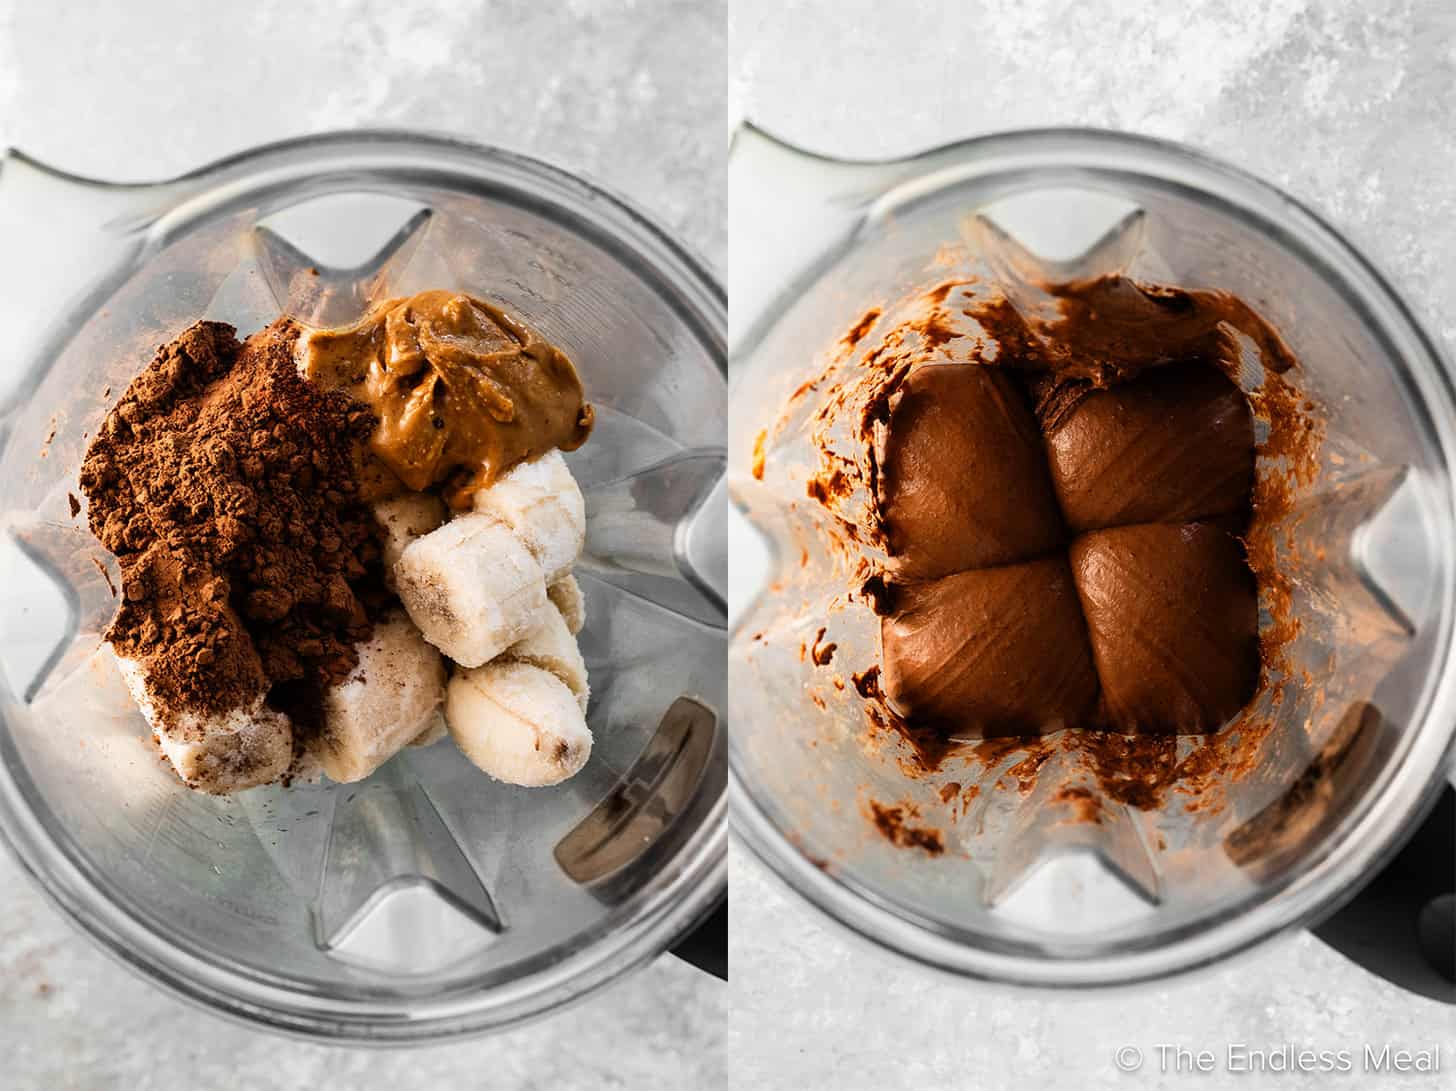 Two pictures showing how to make Chocolate Banana Ice Cream in a blender